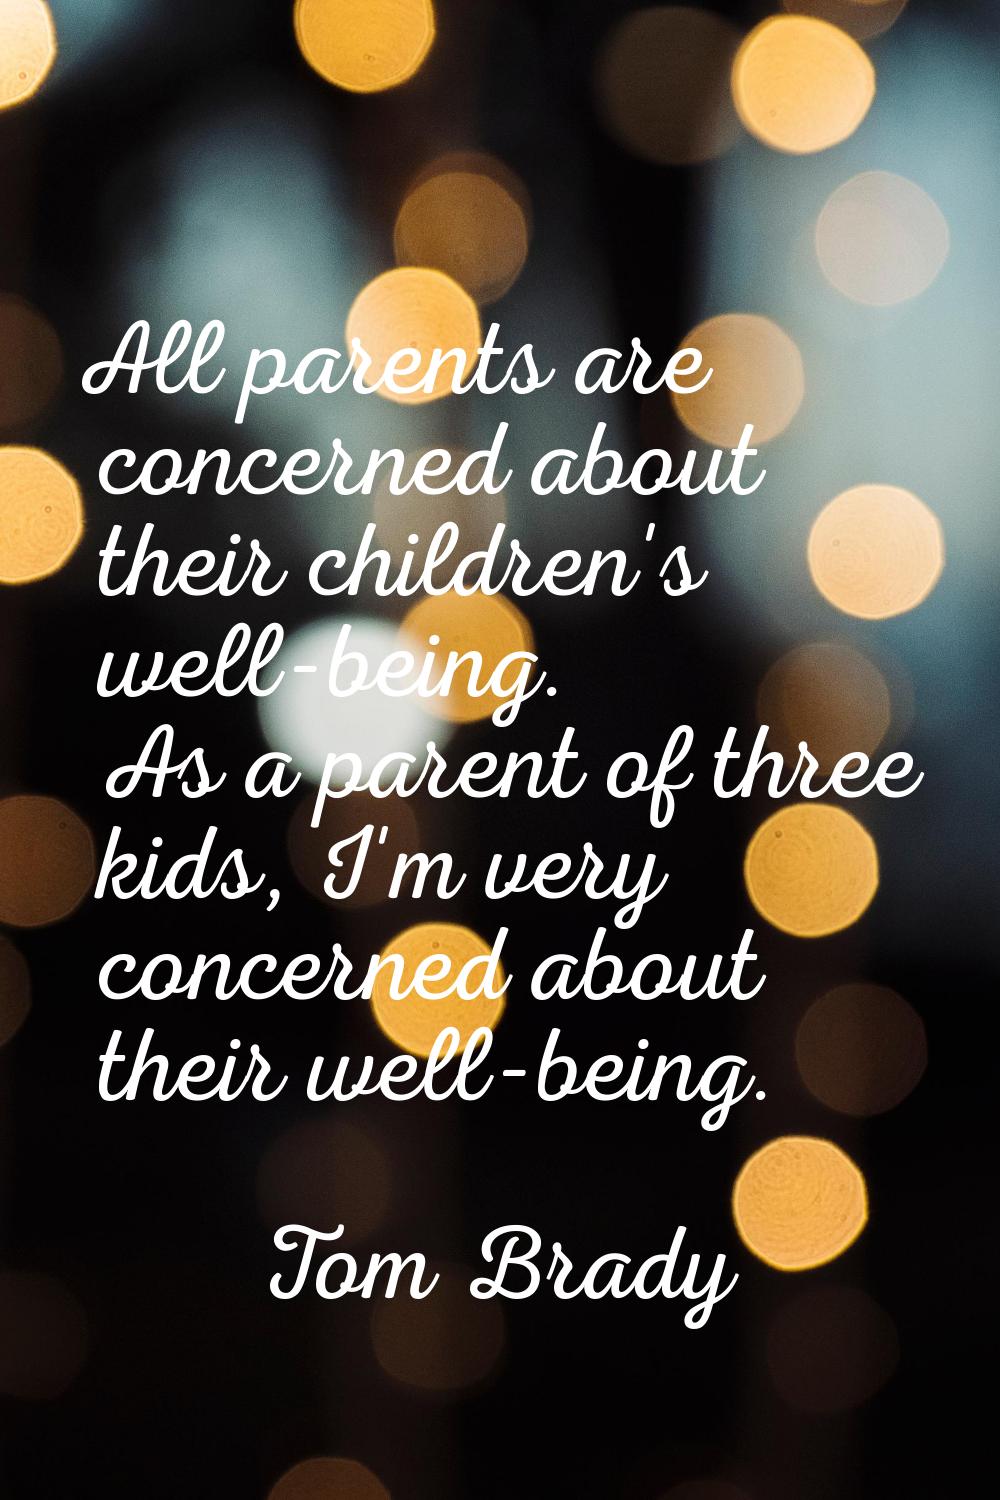 All parents are concerned about their children's well-being. As a parent of three kids, I'm very co